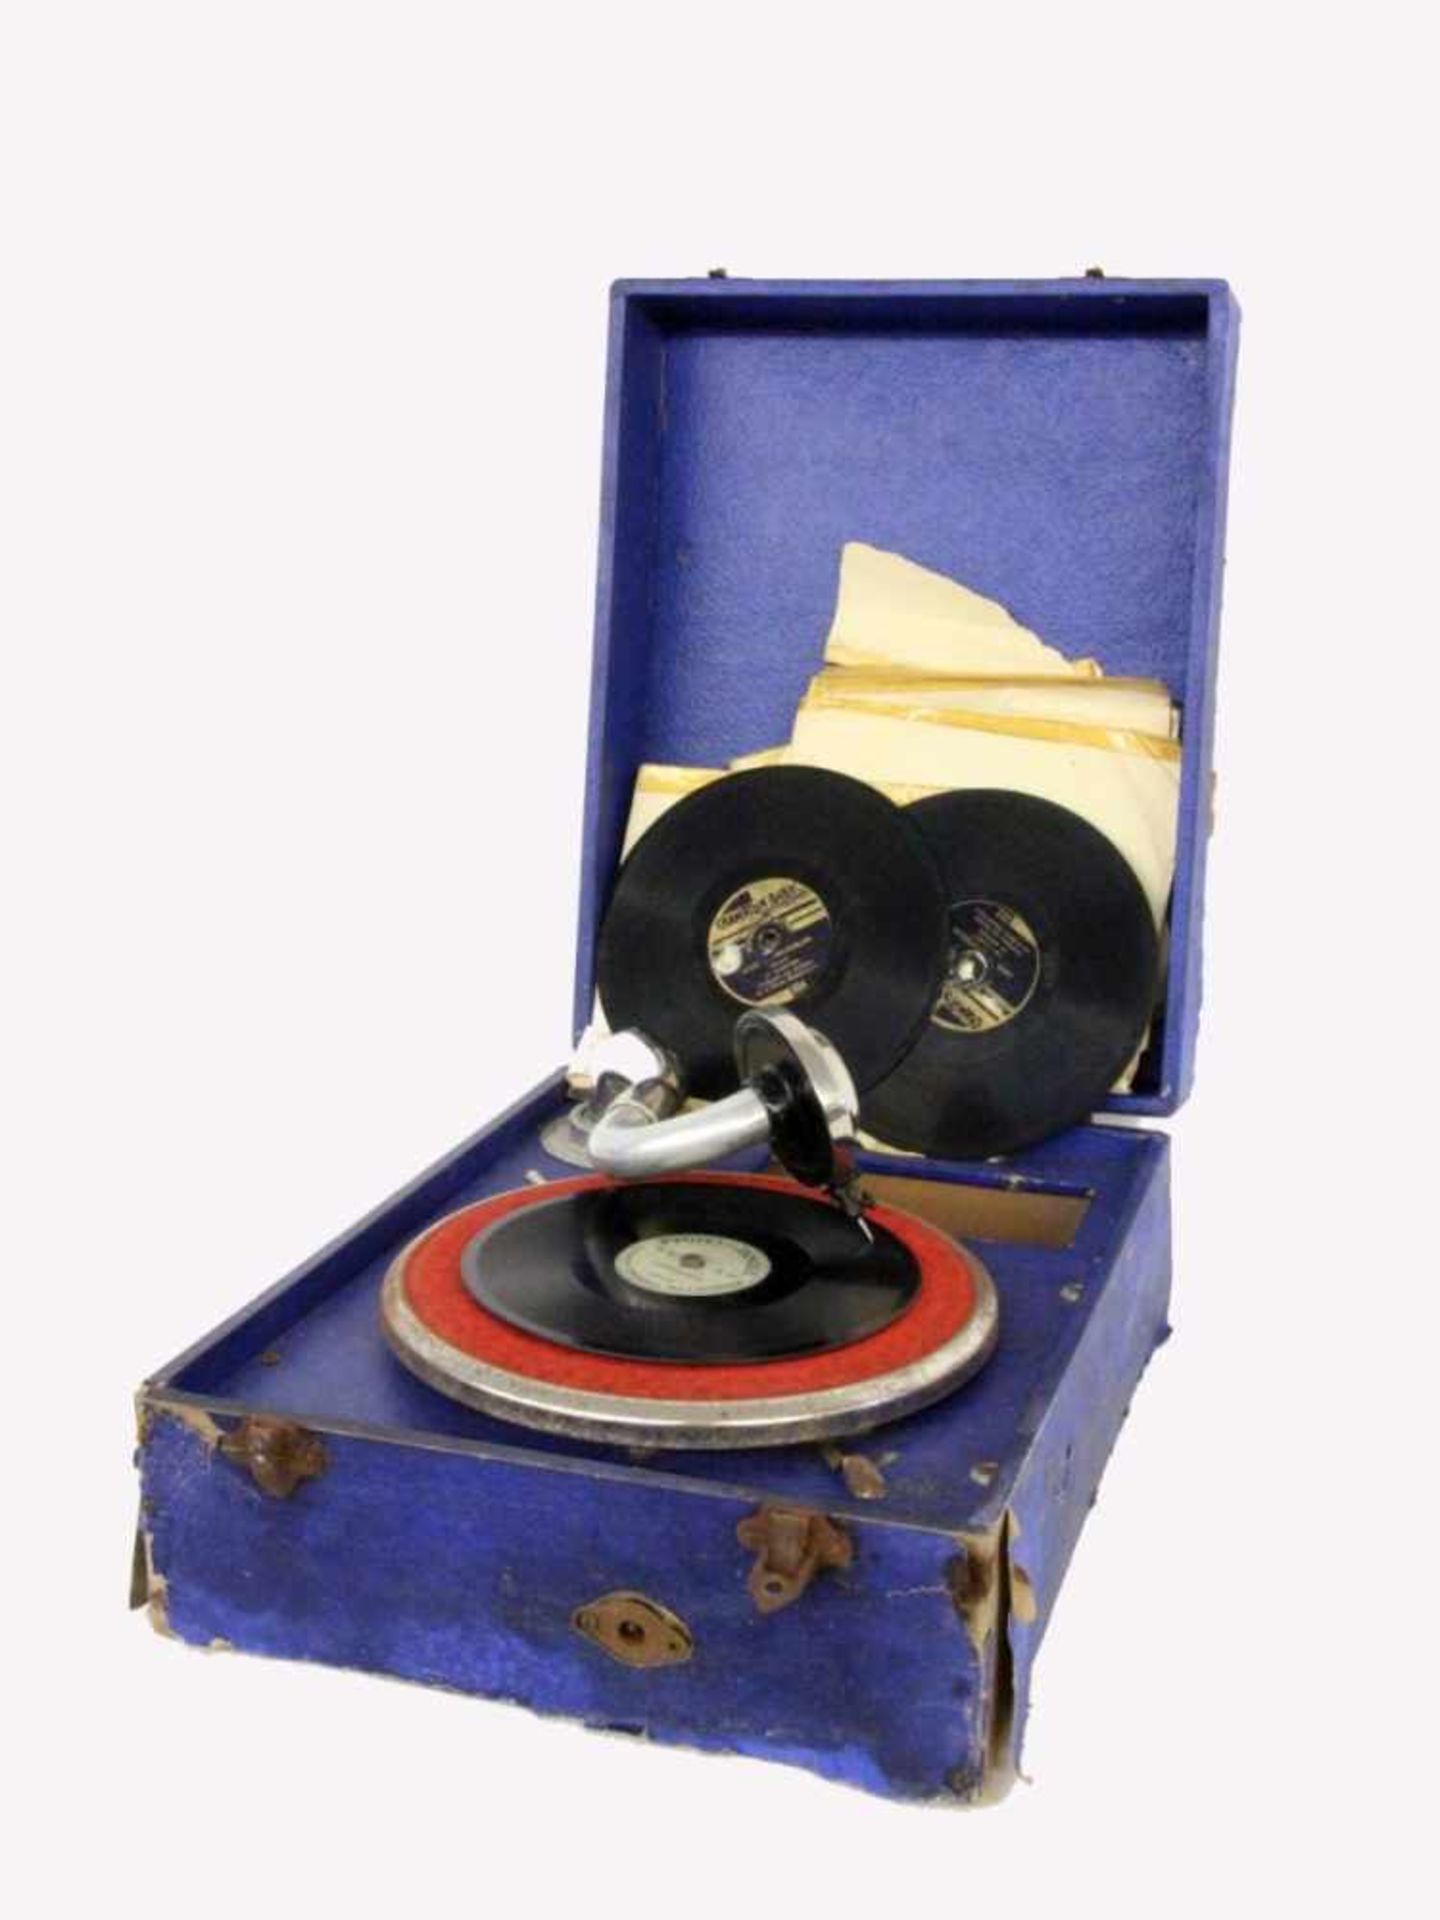 AN ORPHÉE TRAVEL GRAMMOPHONE 1920s In a box with 8 records. Condition: signs of wear andtear.